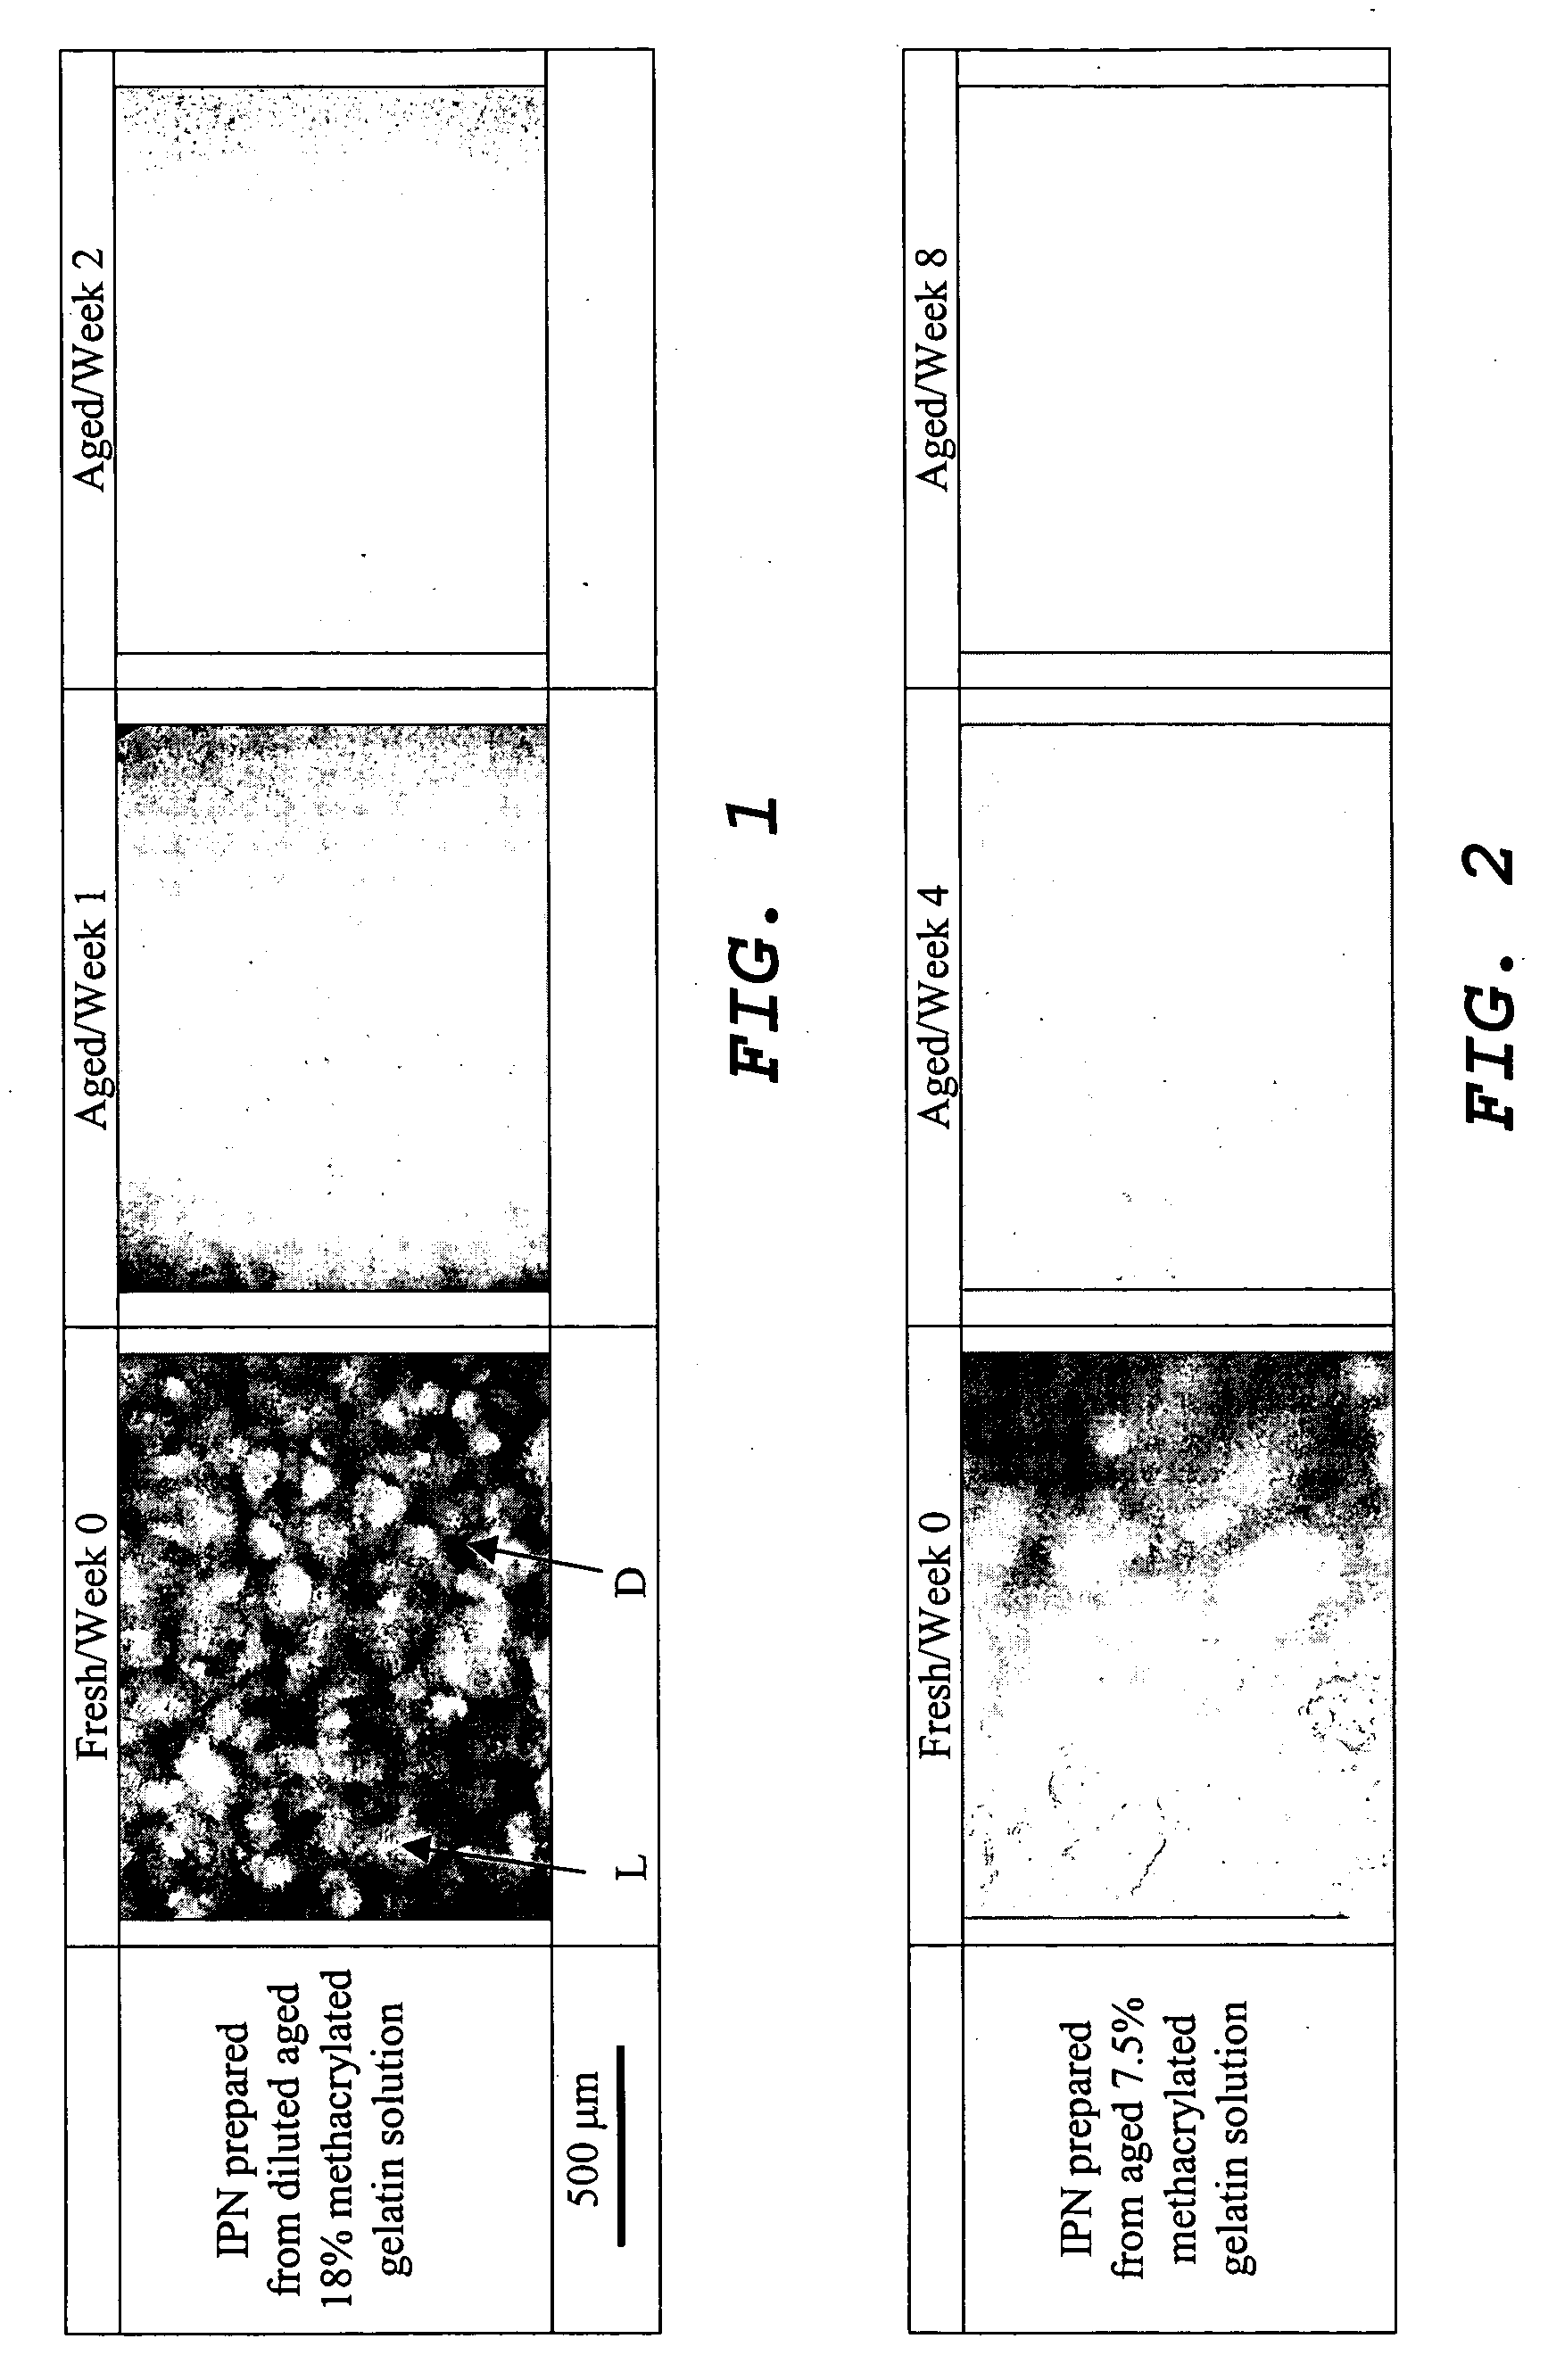 Method of producing interpenetrating polymer network